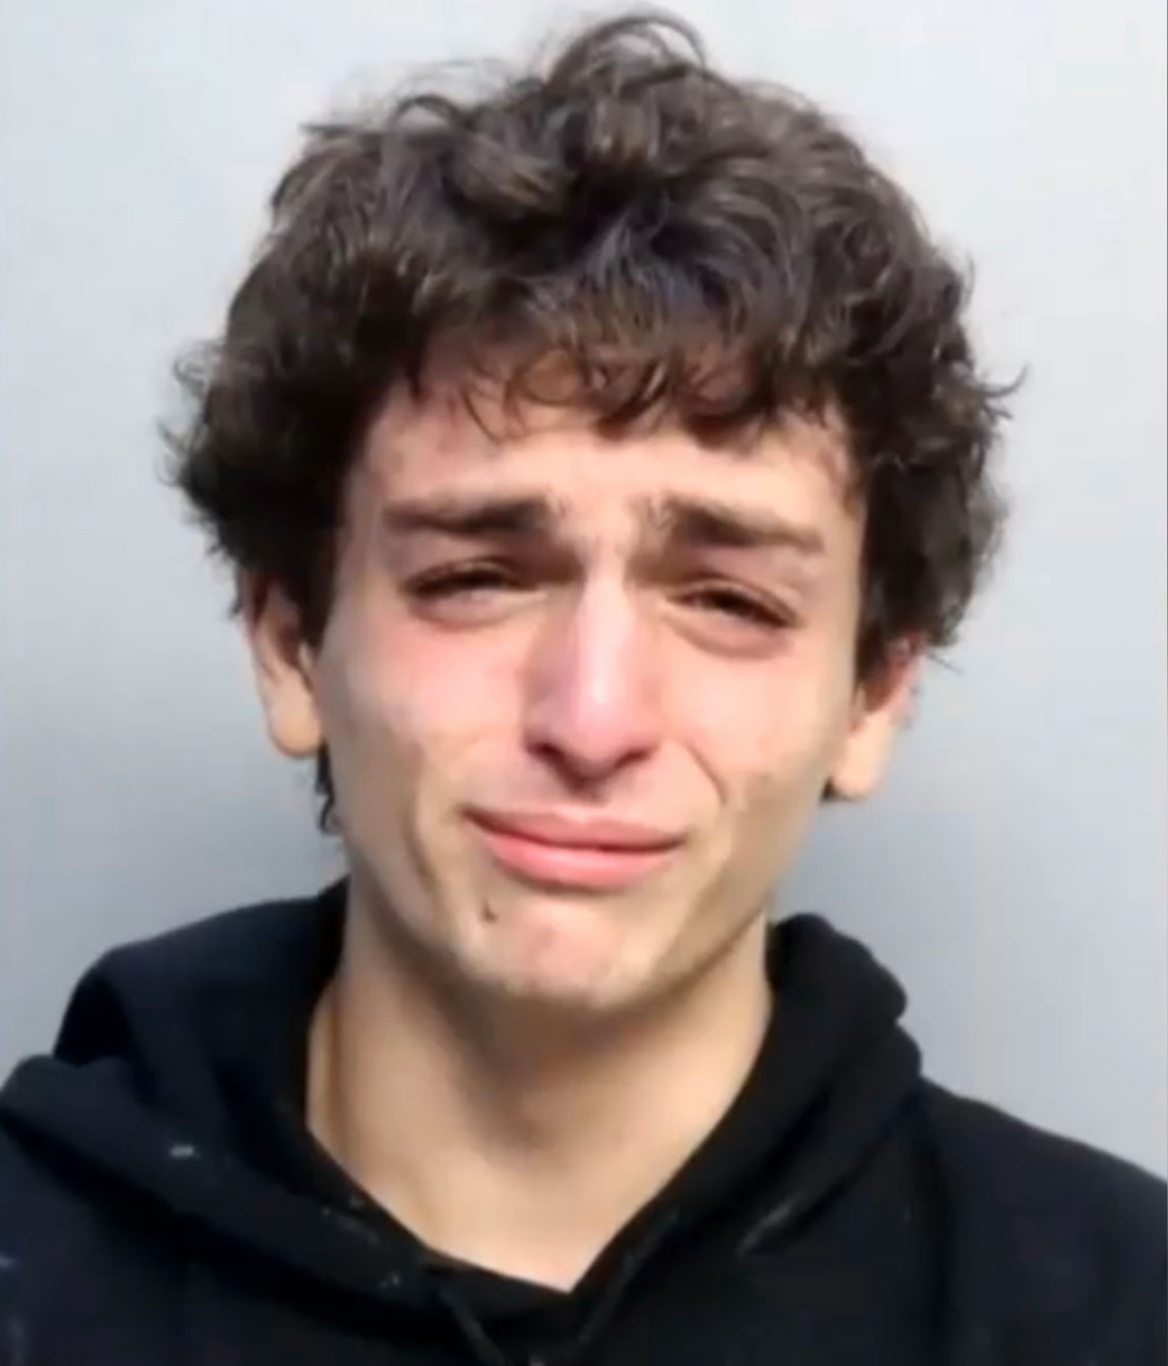 Avraham Gil was captured crying during his mug shot after he was arrested for intentionally driving into a police lieutenant on Jan. 27. Local 10
